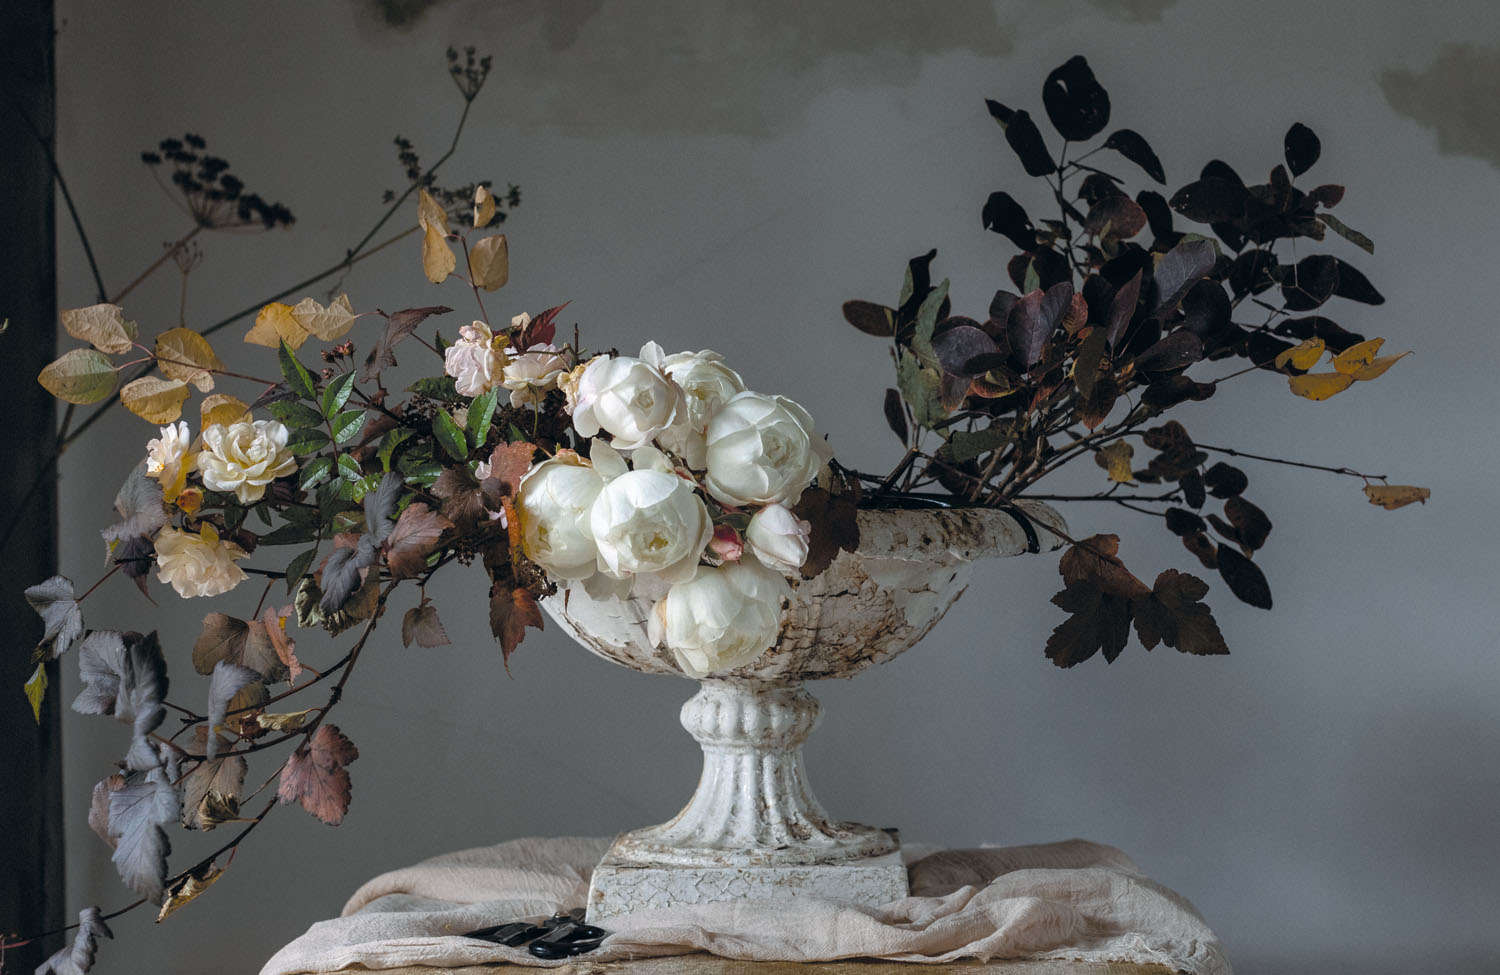 Ball-shaped, soft white roses ‘Desdemona’ are placed low, just of center in the arrangement. Pale pink, small roses 'Cornelia' roses intermingle with the branches of autumn foliage flowing over the left side of the arrangement